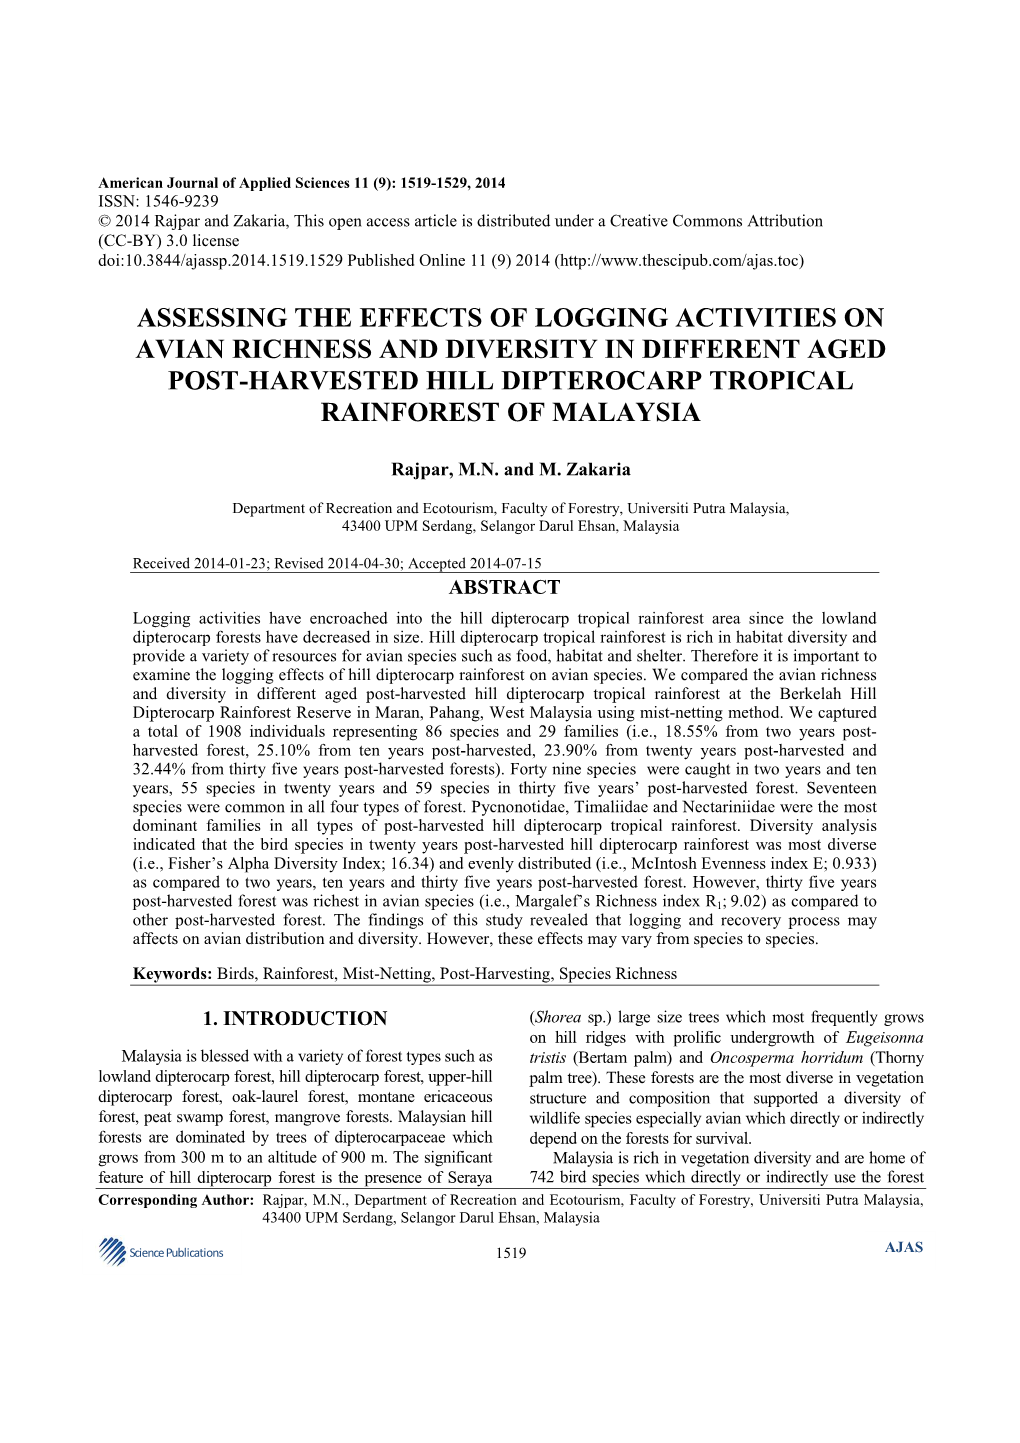 Assessing the Effects of Logging Activities on Avian Richness and Diversity in Different Aged Post-Harvested Hill Dipterocarp Tropical Rainforest of Malaysia